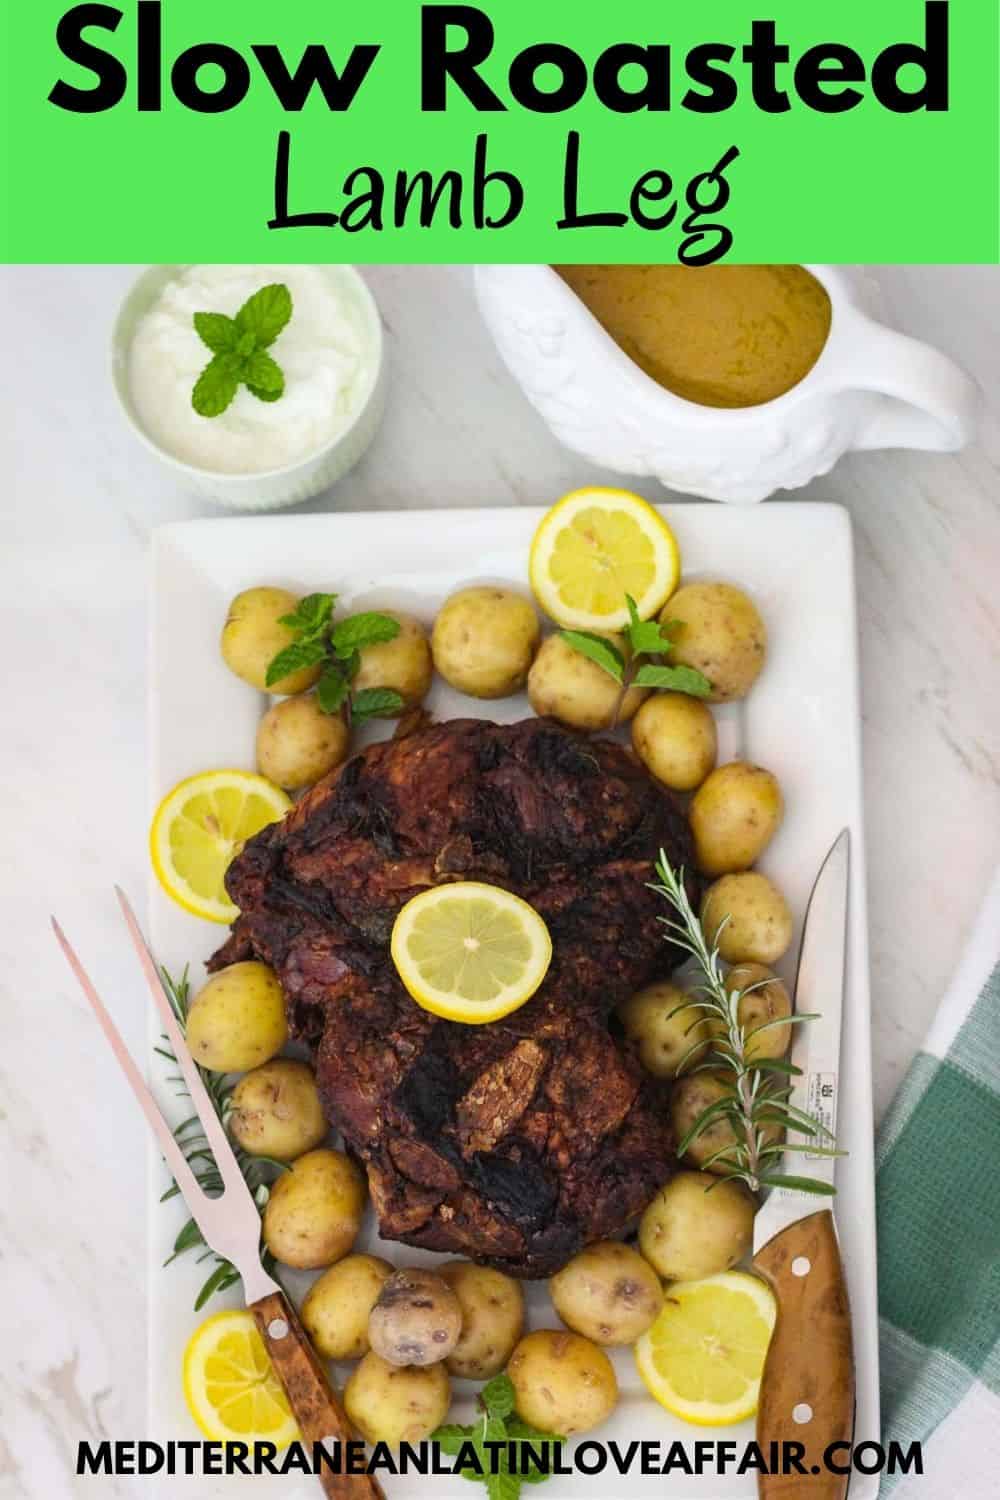 An image prepared for Pinterest. It shows the slow roasted lamb leg (boneless) served on a platter with potatoes, herbs and rosemary. Image has a title bar and the website link in the bottom.